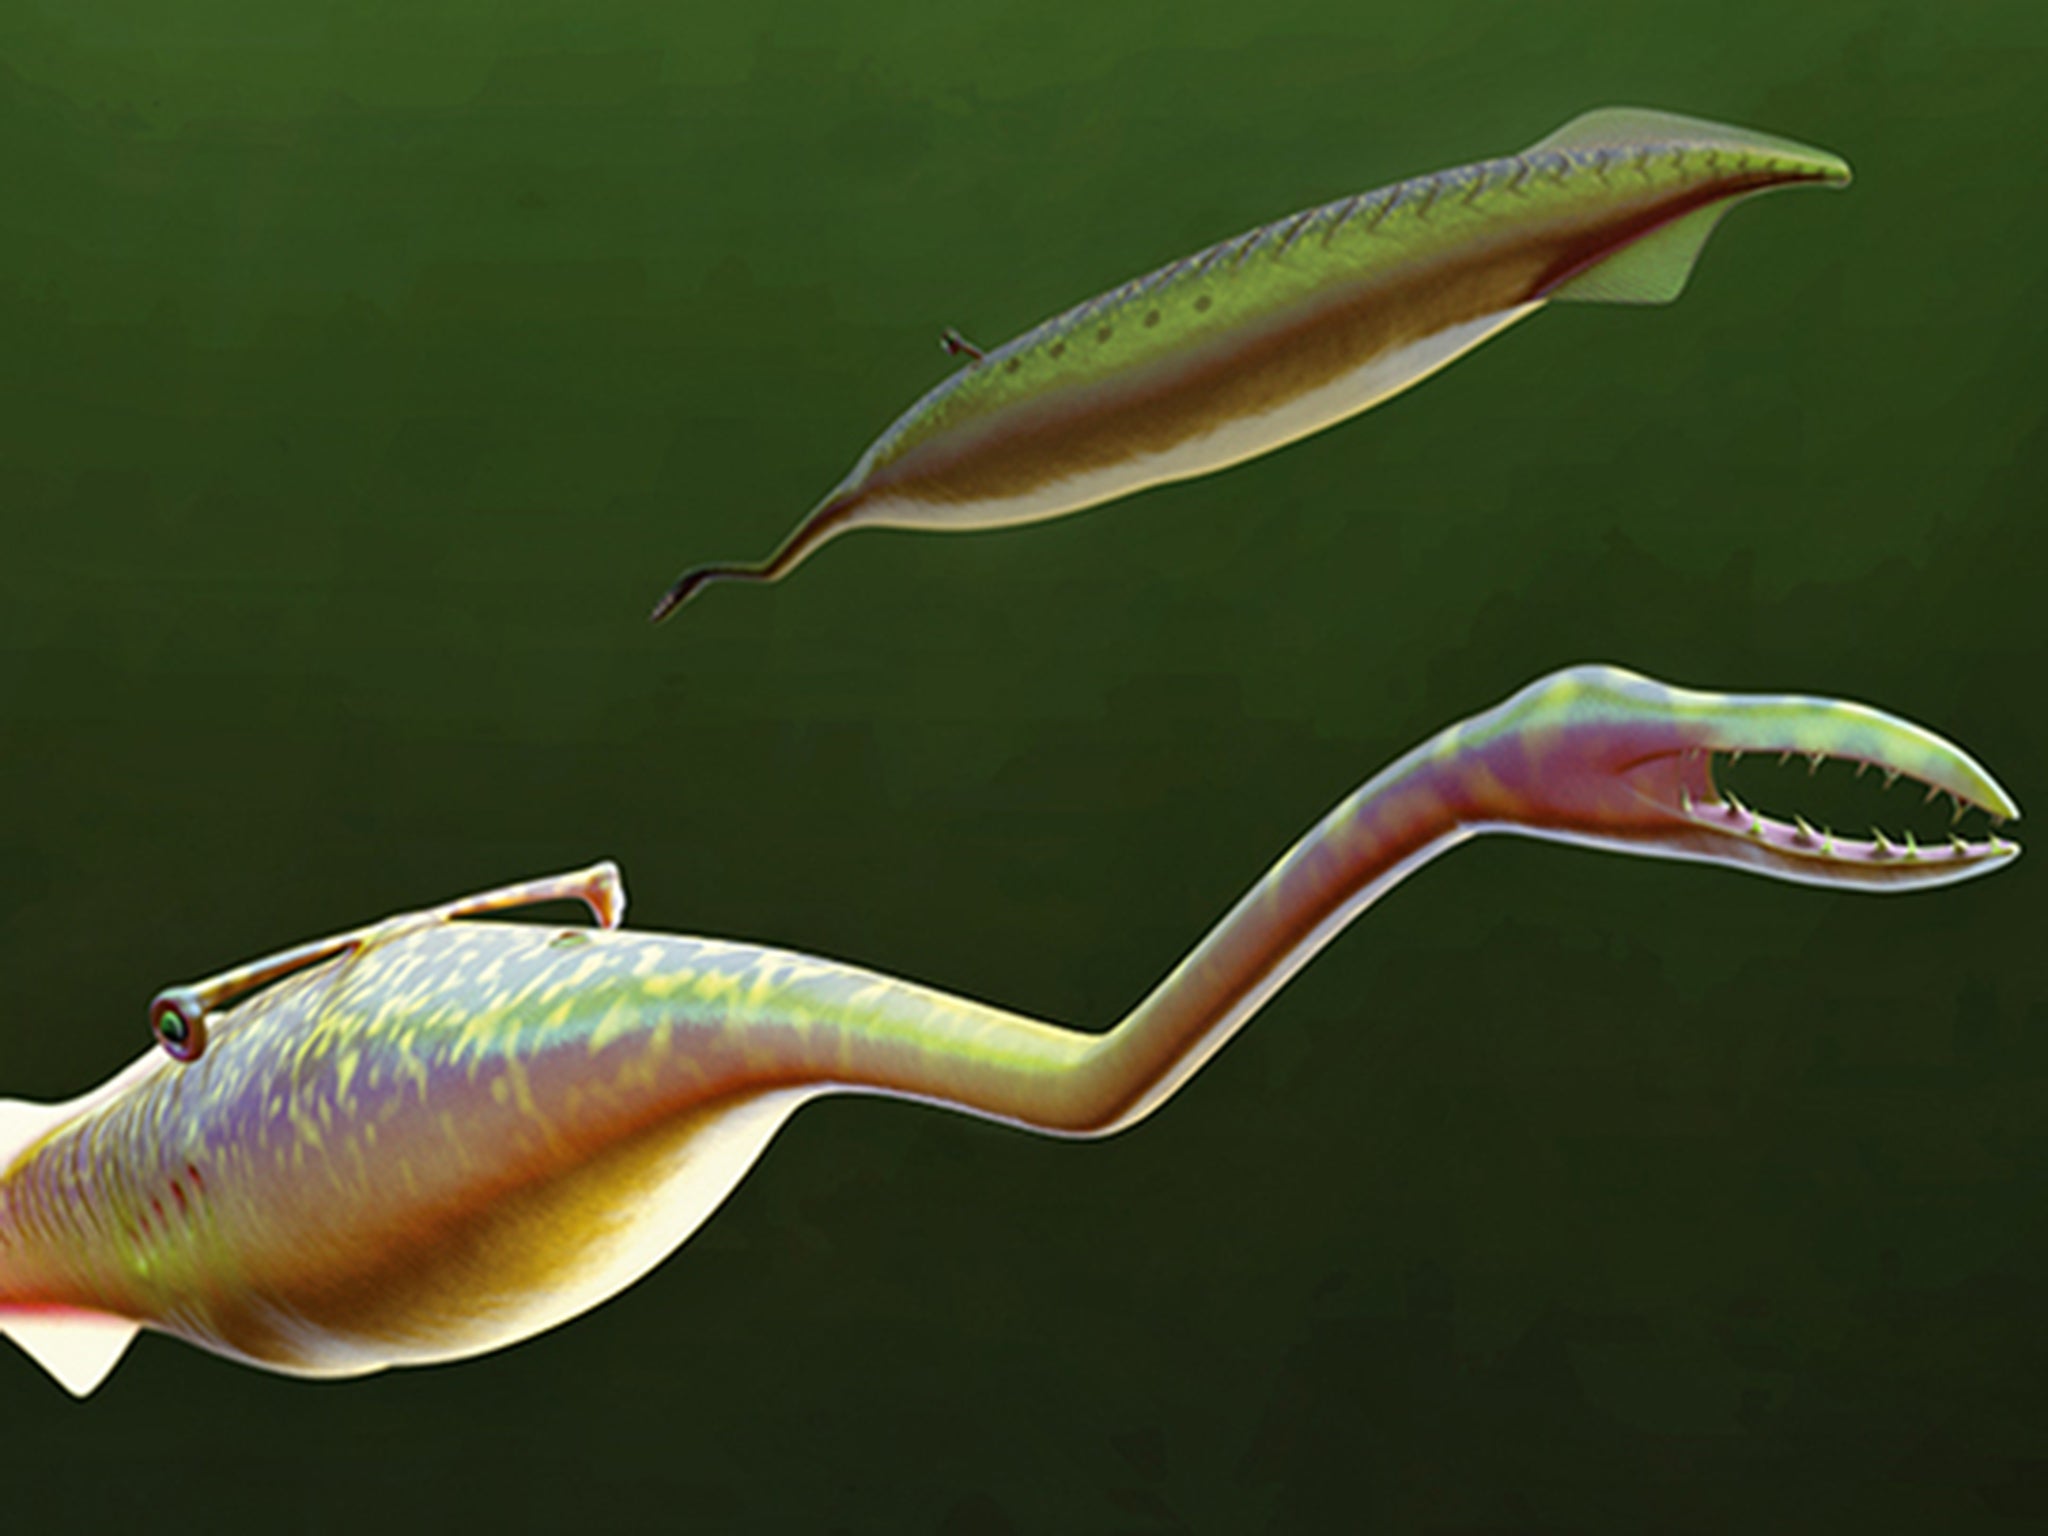 How the Tully Monster might have looked 300 million years ago